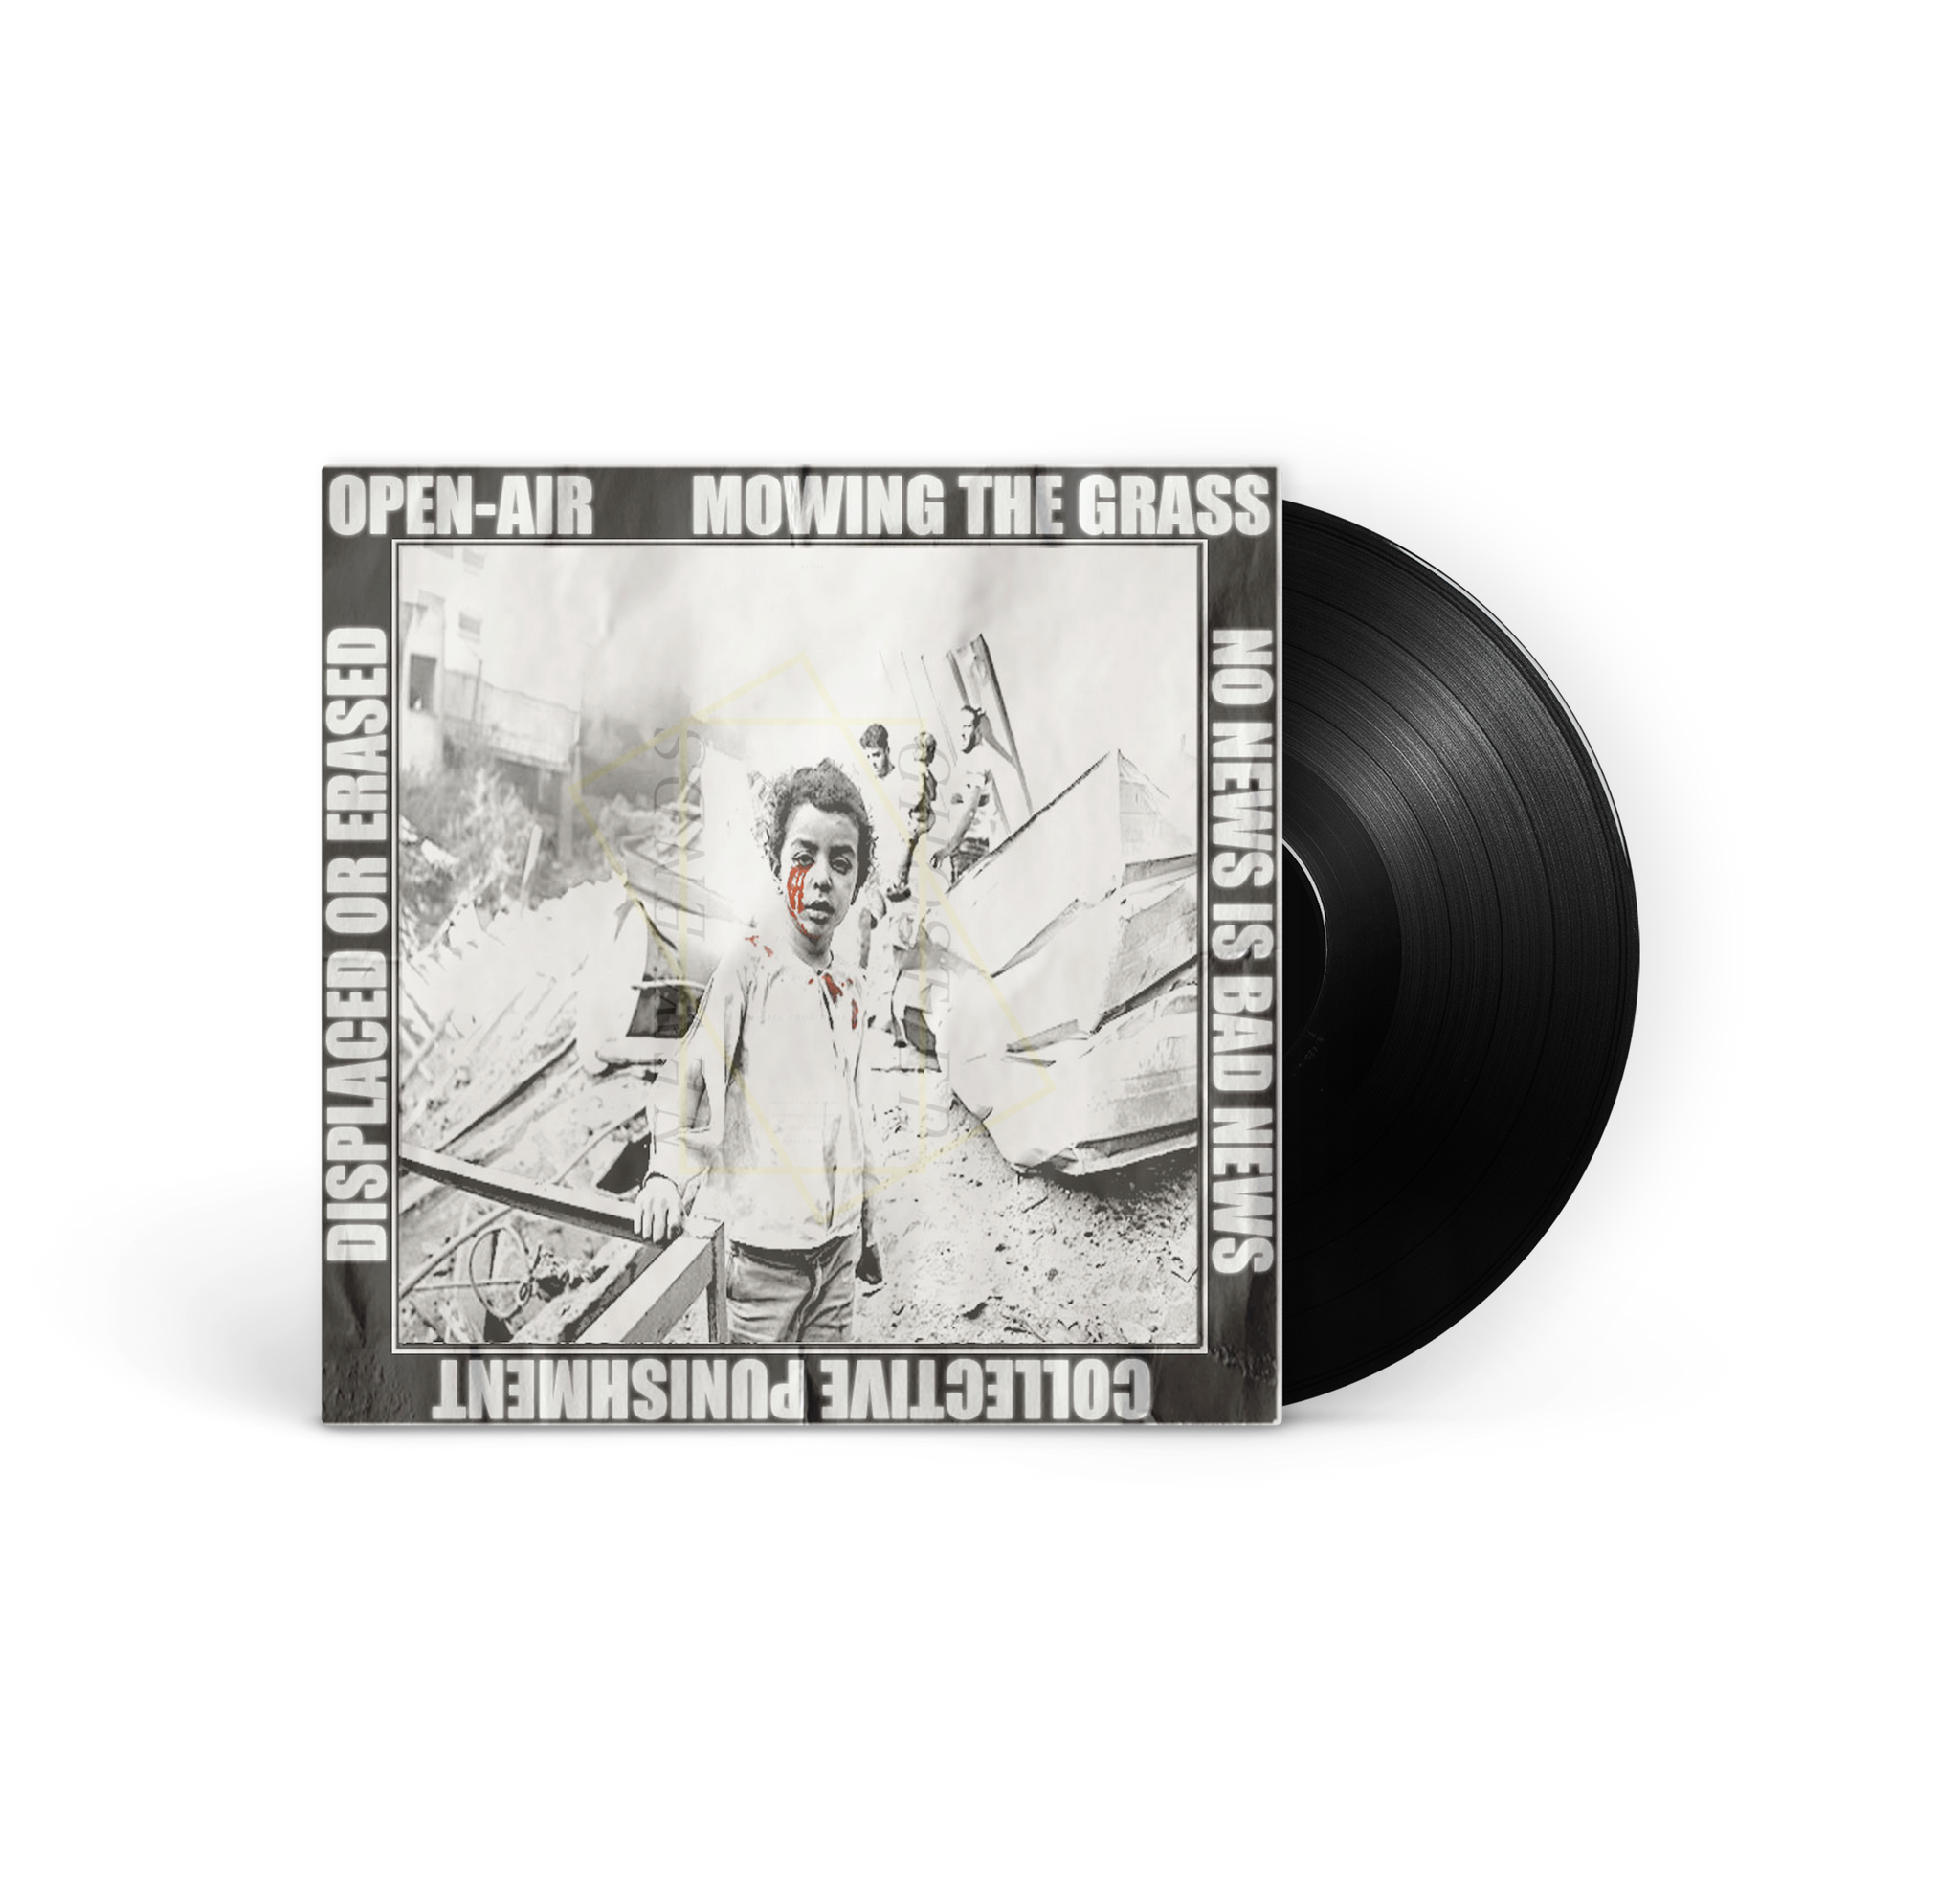 5 CRUCIAL TRACKS FOR PALESTINE // Proceeds going to ANERA (American Near East Refugee Aid)  'COLLECTIVE PUNISHMENT EP' Music by Bryan Lothian of A Global Threat  Limited to 200 on black vinyl and 100 on white with black splatter.   Vinyl packages are shipping in early 2024 including an additional track, poetry, art and other inserts.   ПΞ𖤐П FU̷l̵U̷ЯΞ 4GAZA // THIS IS A PRE-ORDER  © ℗ 2023 Neon Nile/Bryan Lothian